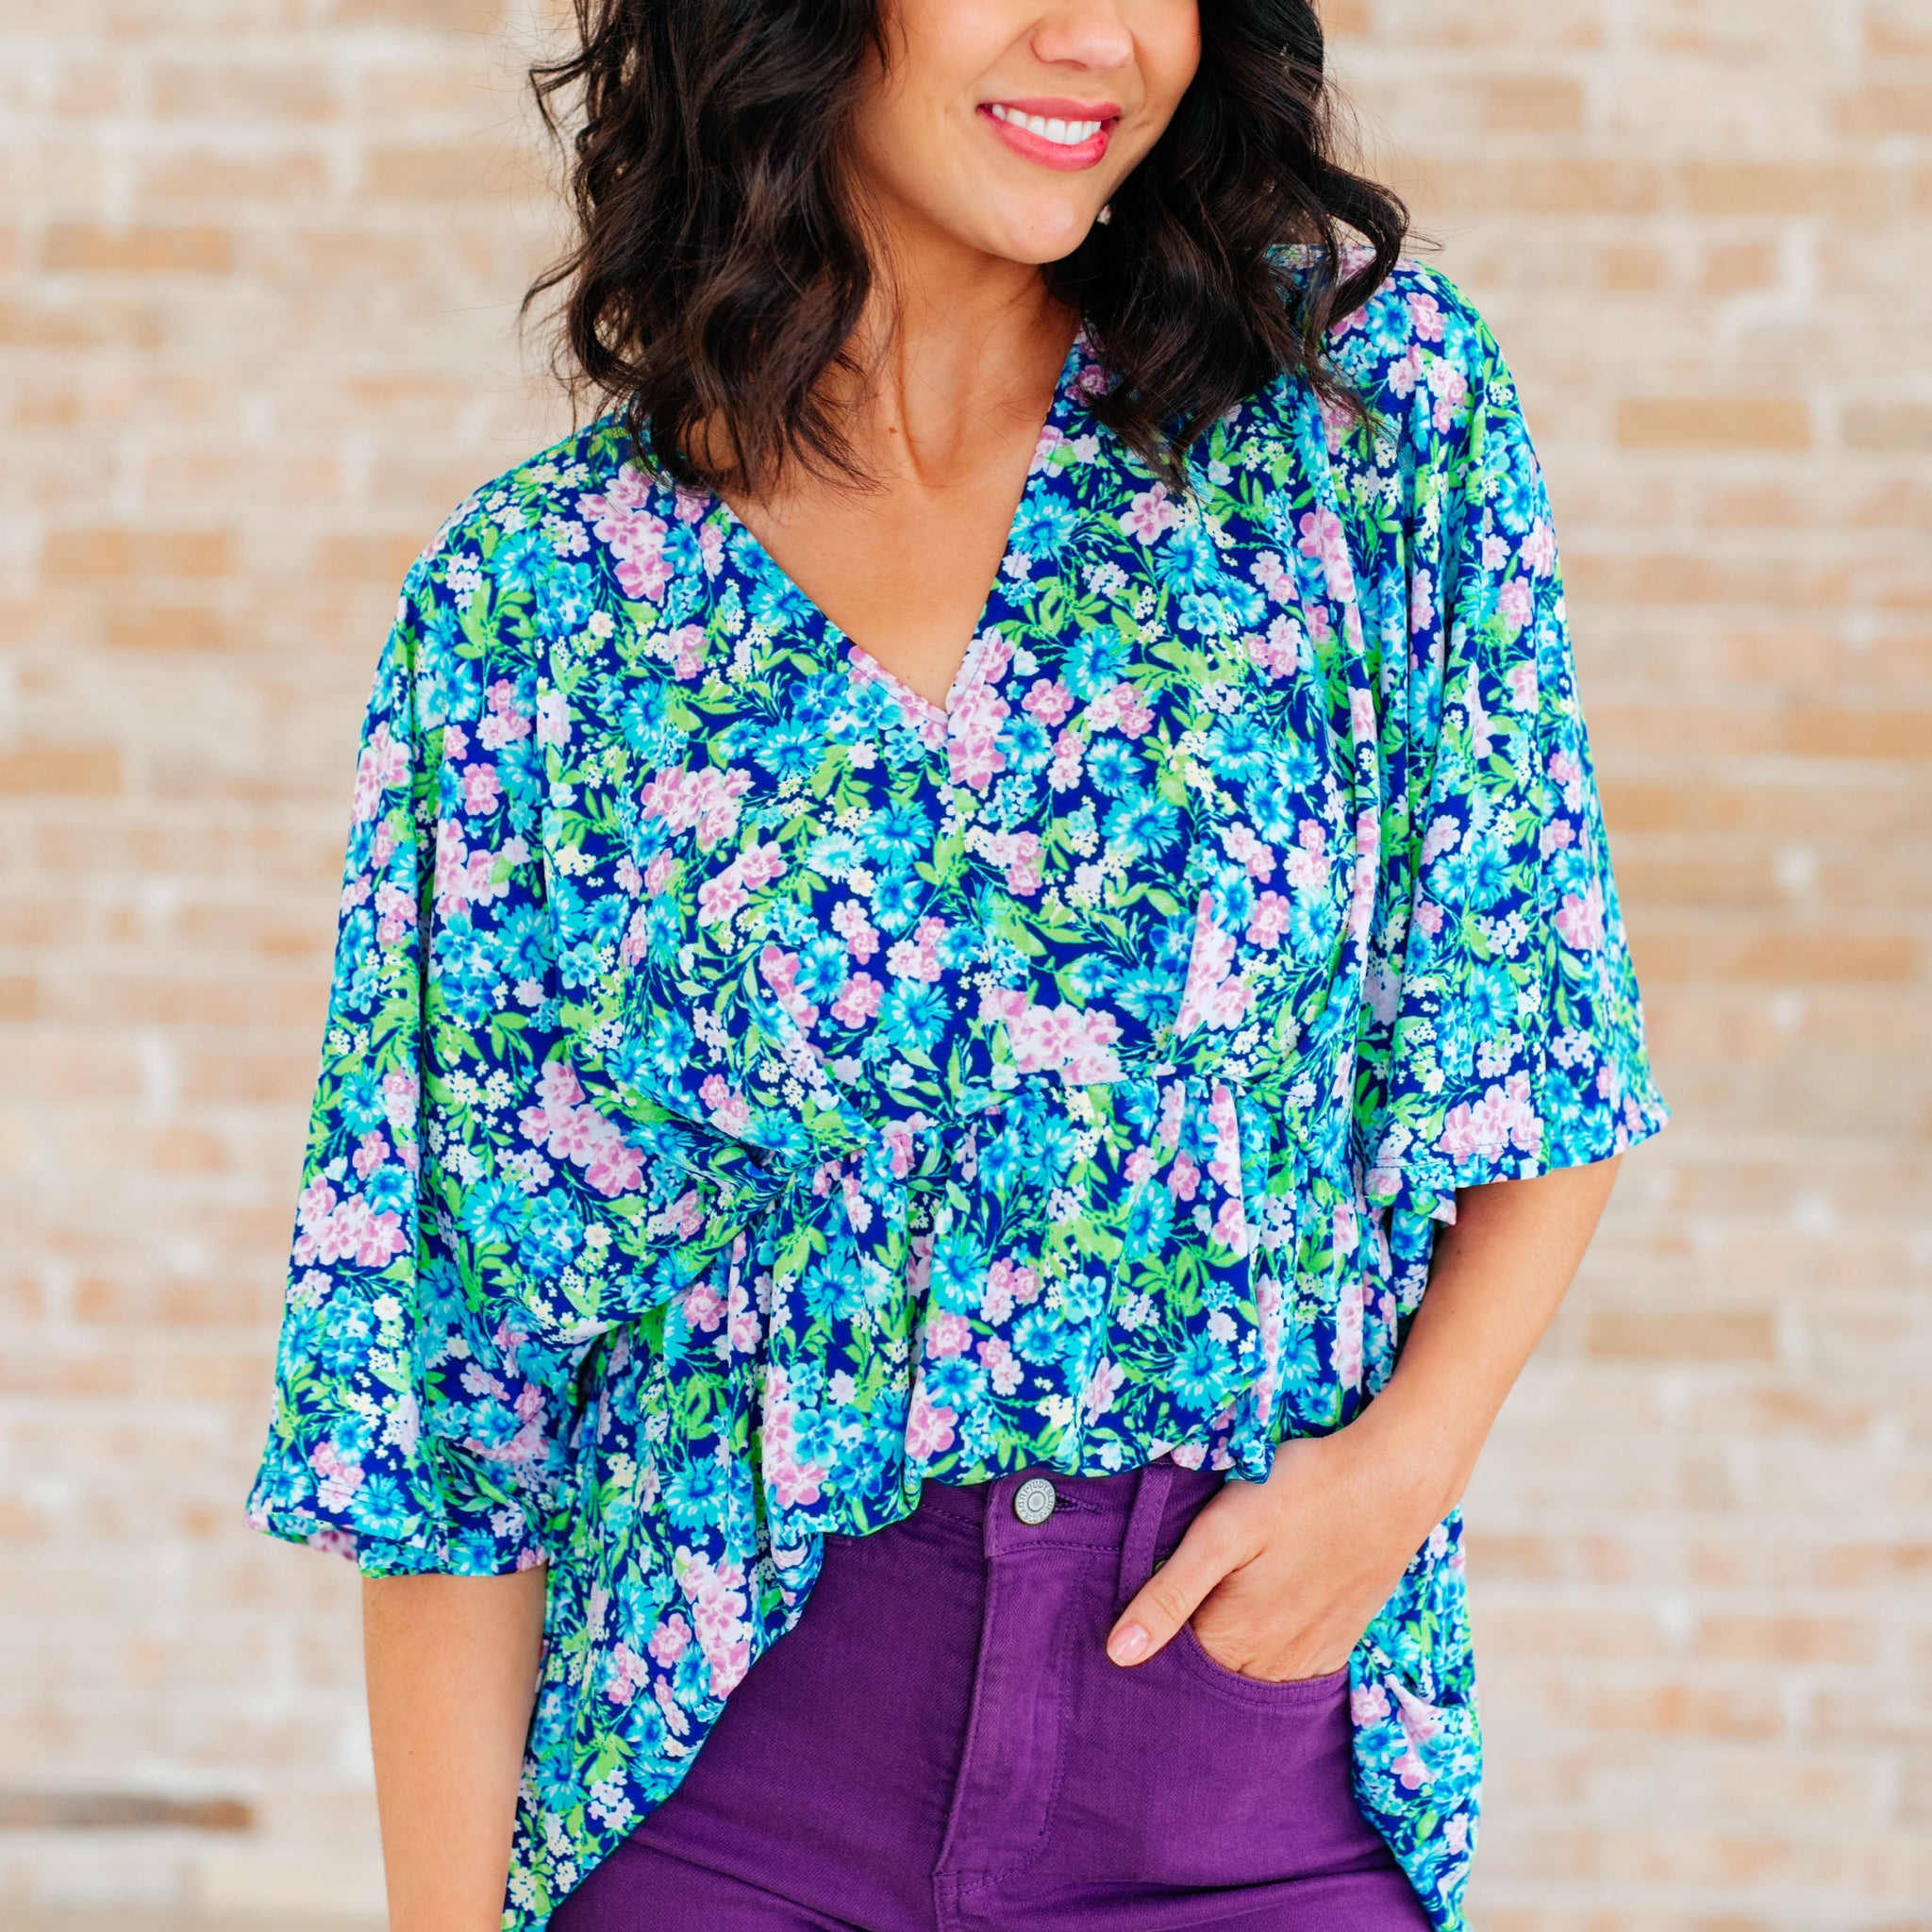 Dreamer Peplum Top in Navy and Mint Floral